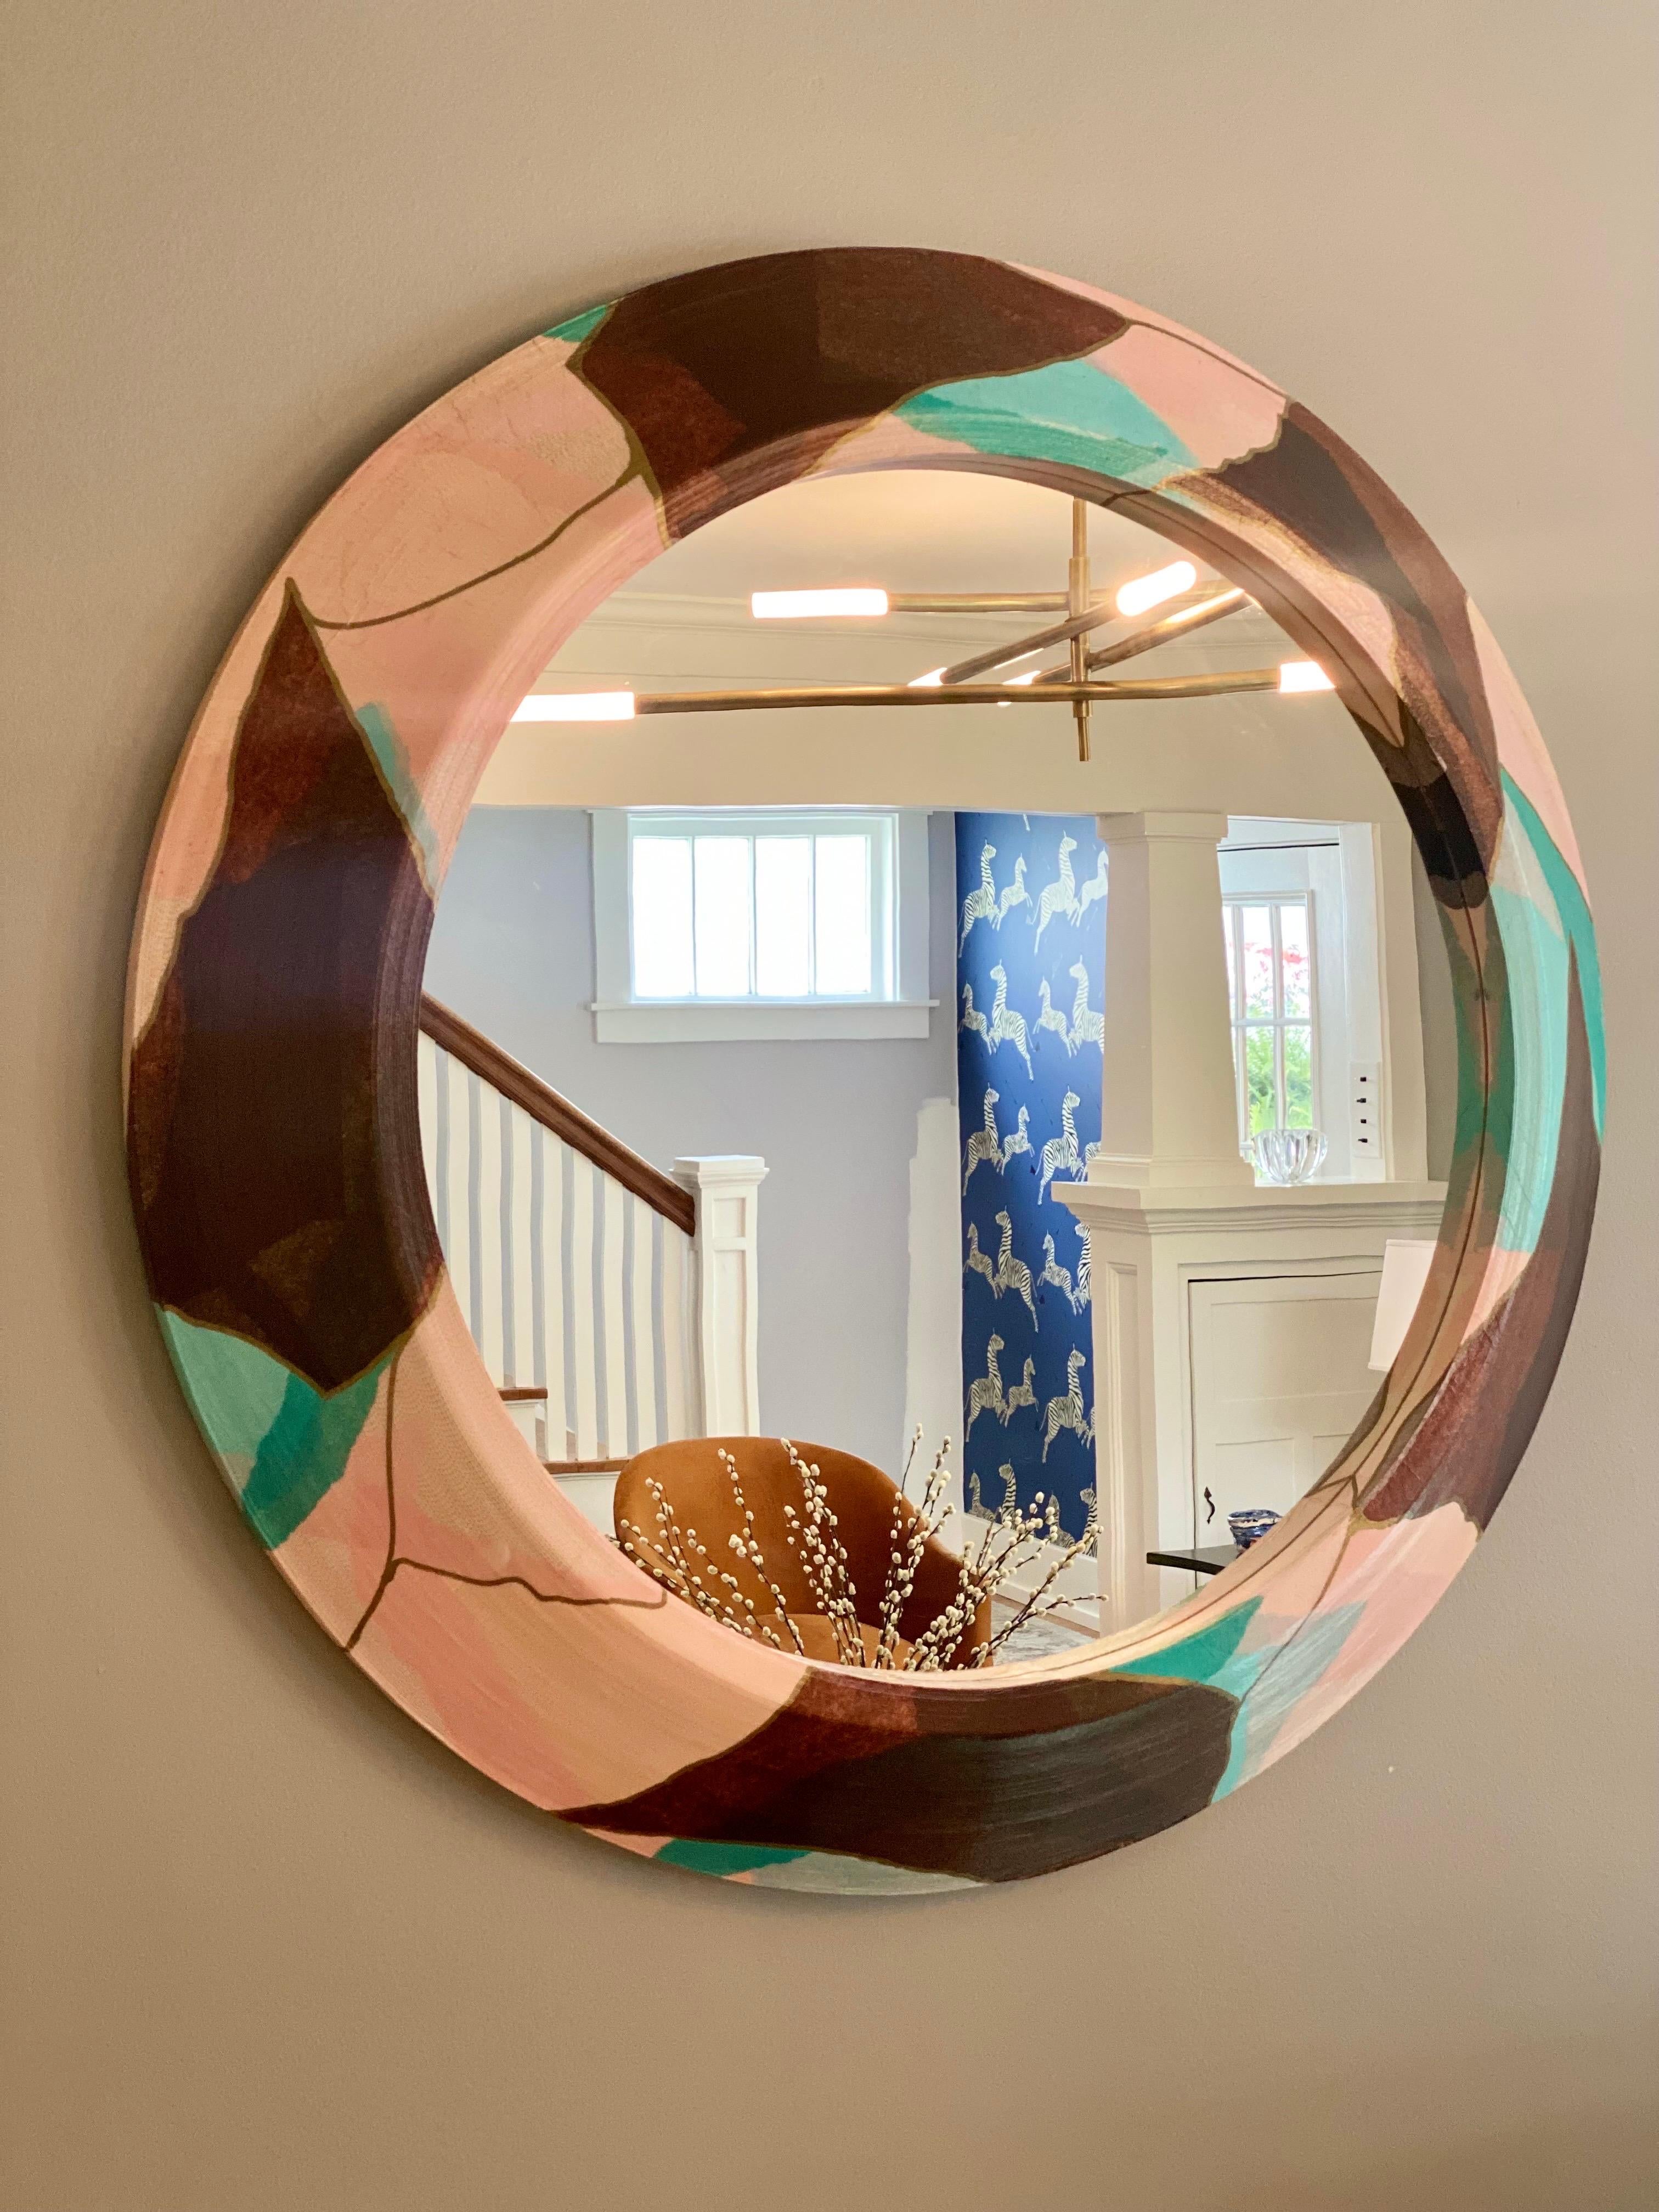 We are very pleased to offer a stunning round wall mirror by Charlotte & Jerry Garfinkle, for Flute Inc., circa the 1980s. Flute was a Chicago-based design company specializing in decorative accessories made of corrugated paper. Blurring the line